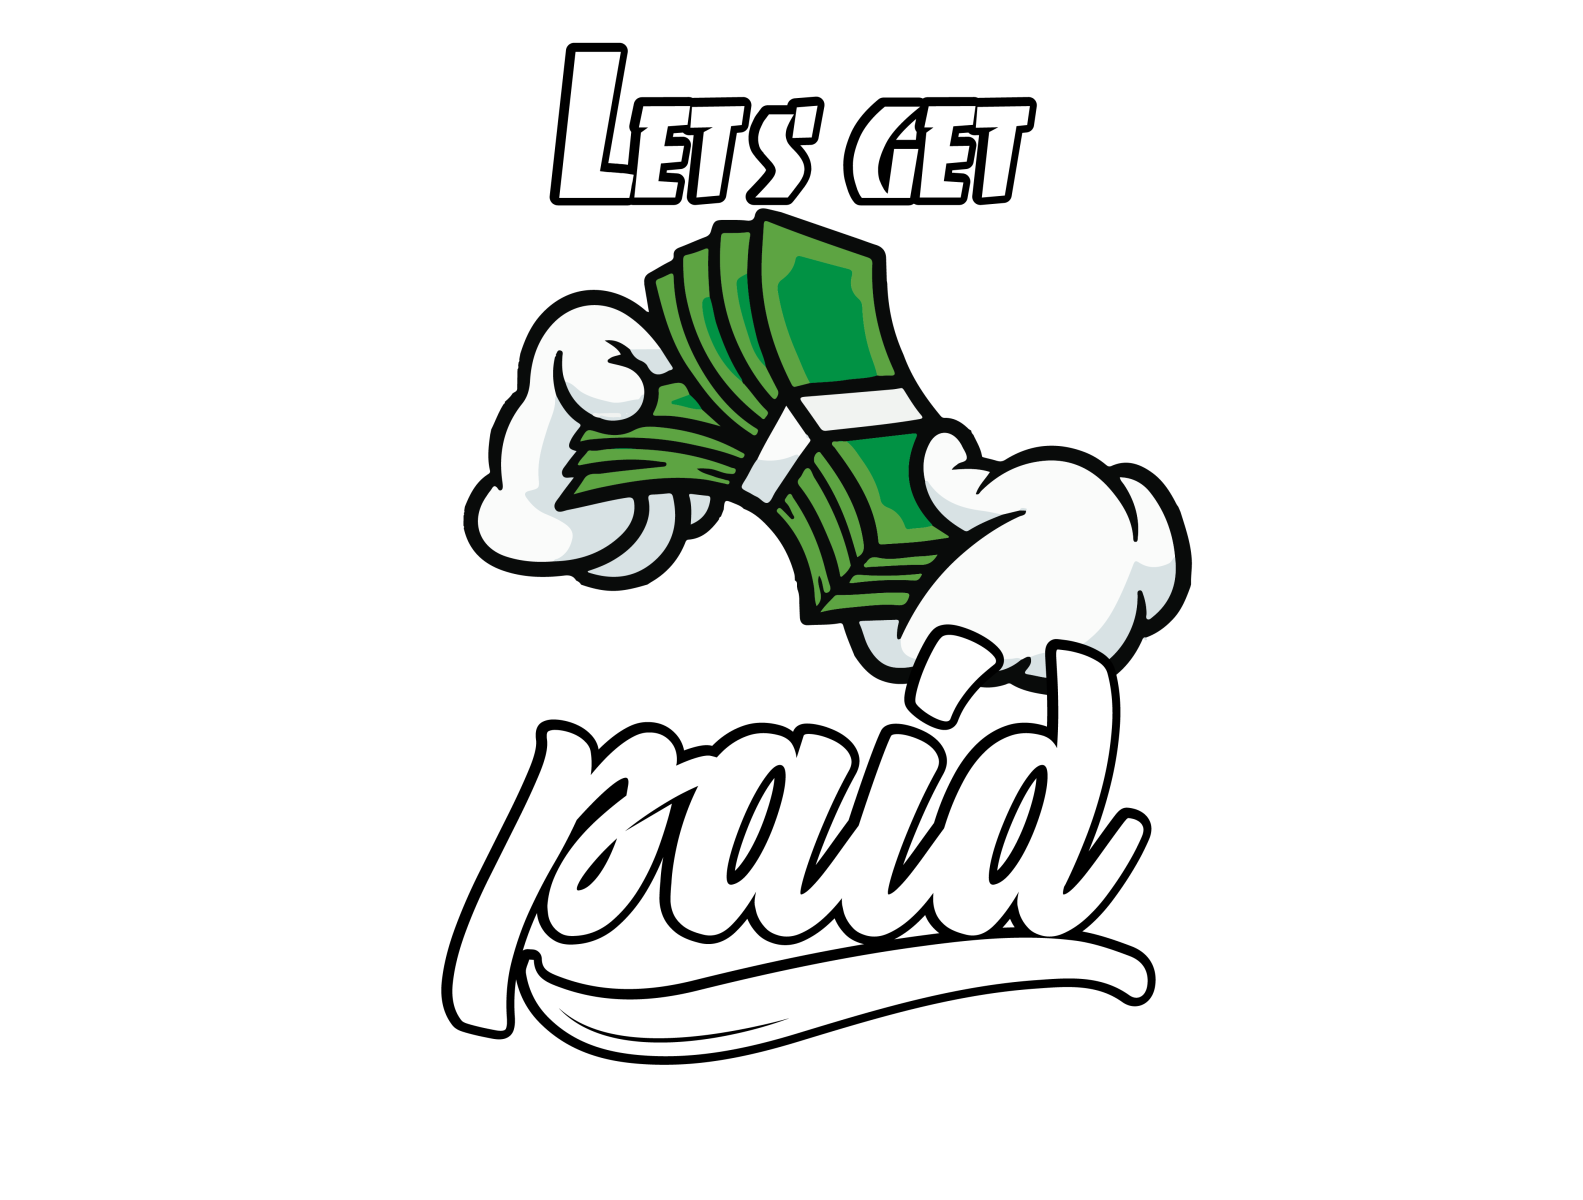 GET PAID by Arslan on Dribbble